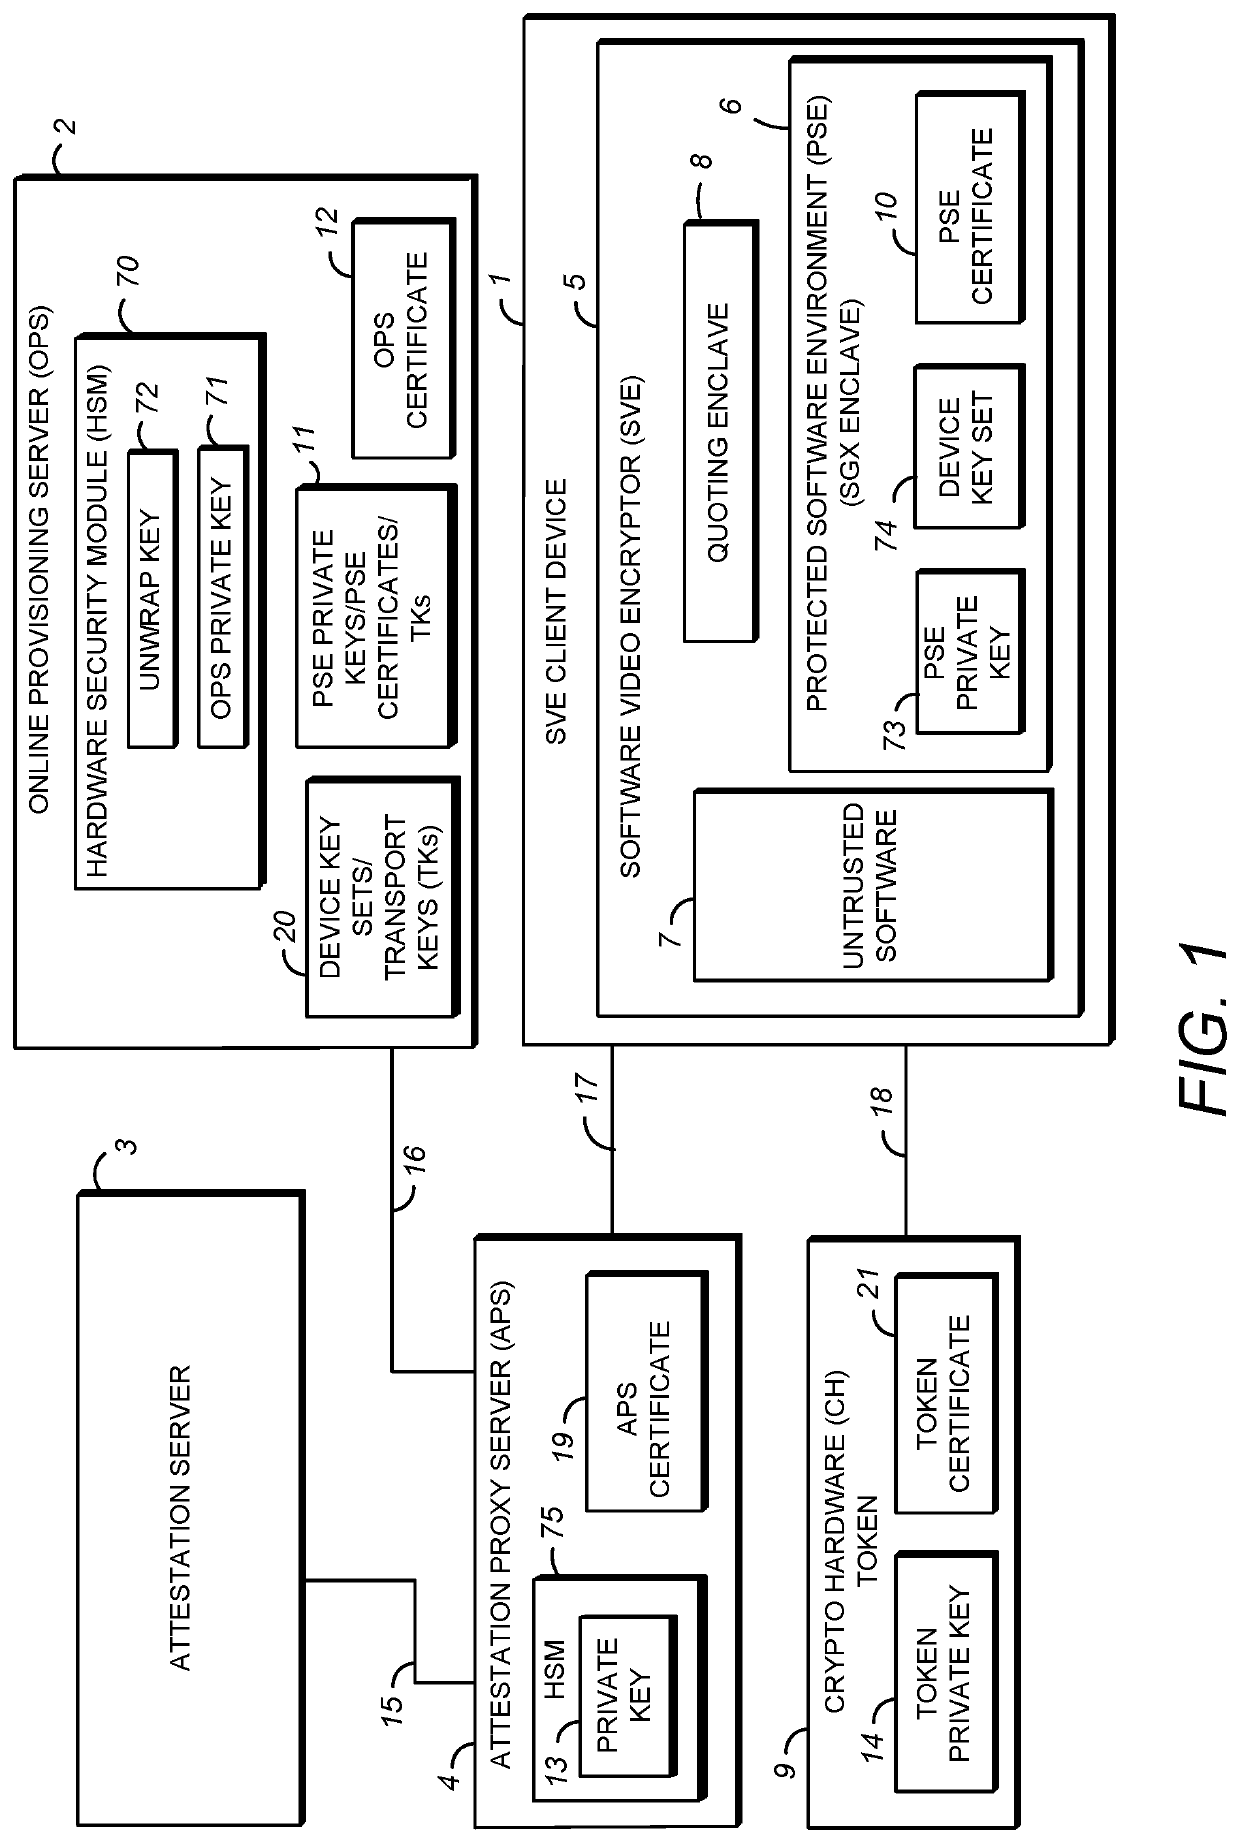 Secure distribution of device key sets over a network